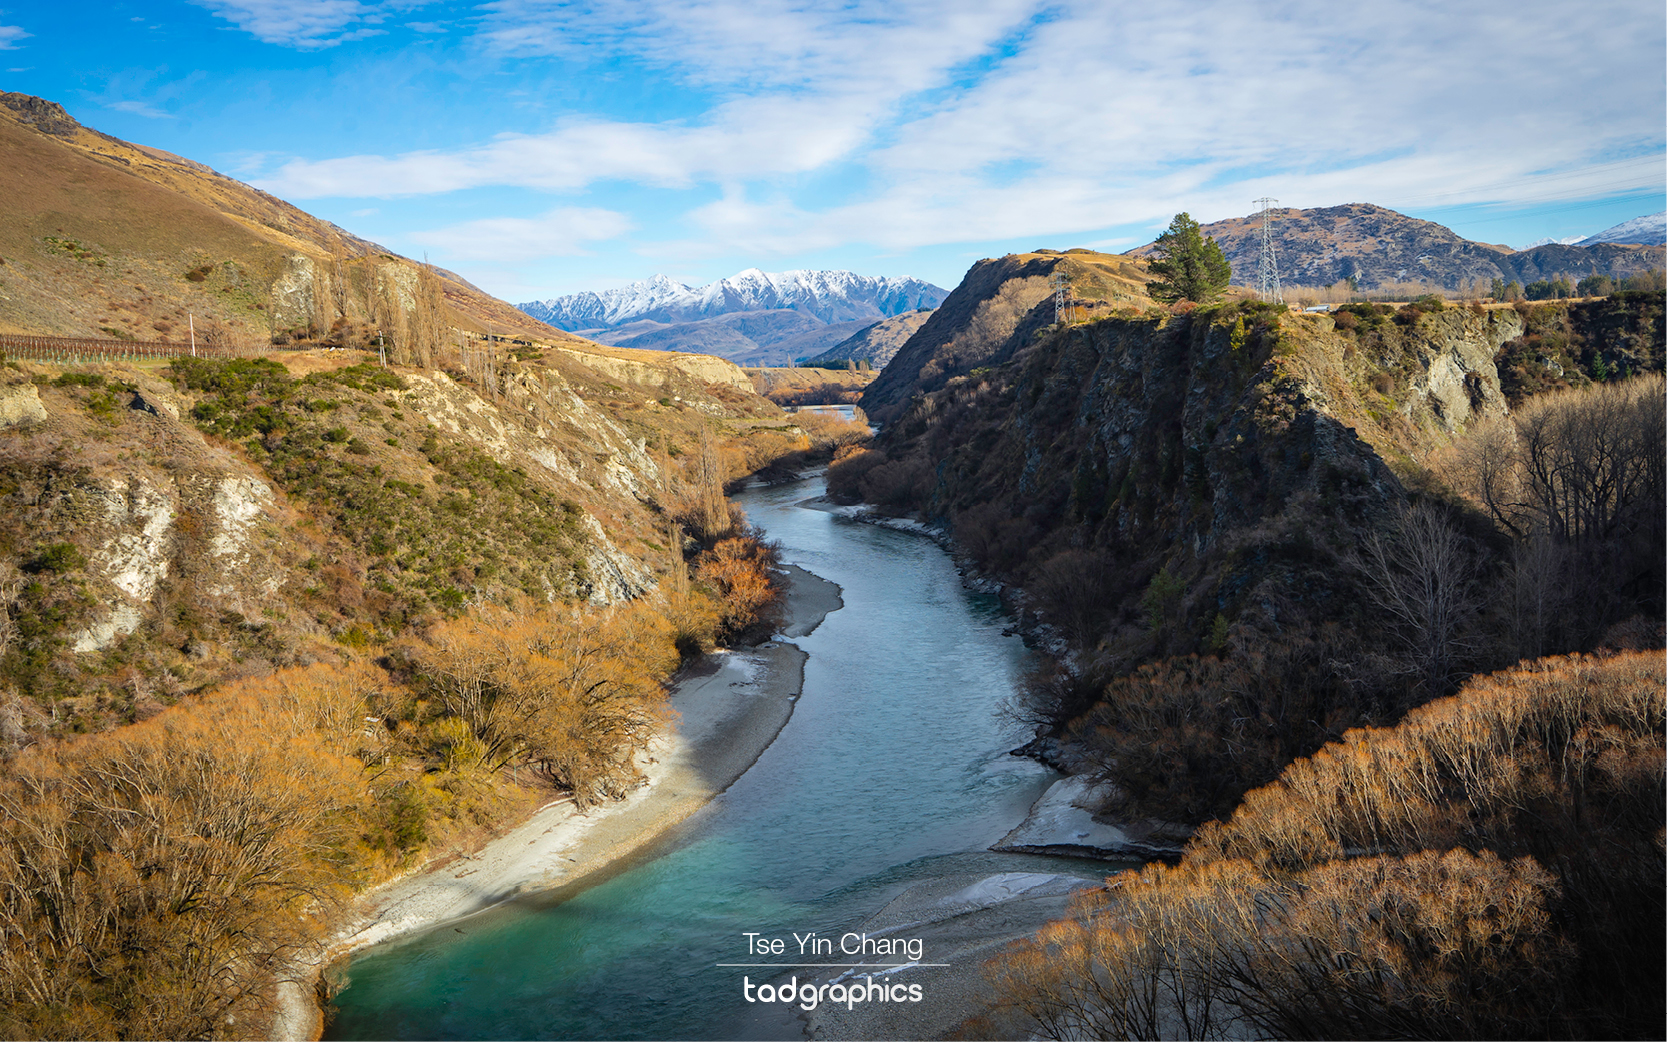 Spectacular Kawarau Gorge, known as the Anduin River, that the Fellowship of the Ring paddled down to be greeted by the two giant statues on either side on the river. The two giant statues were added in post production.